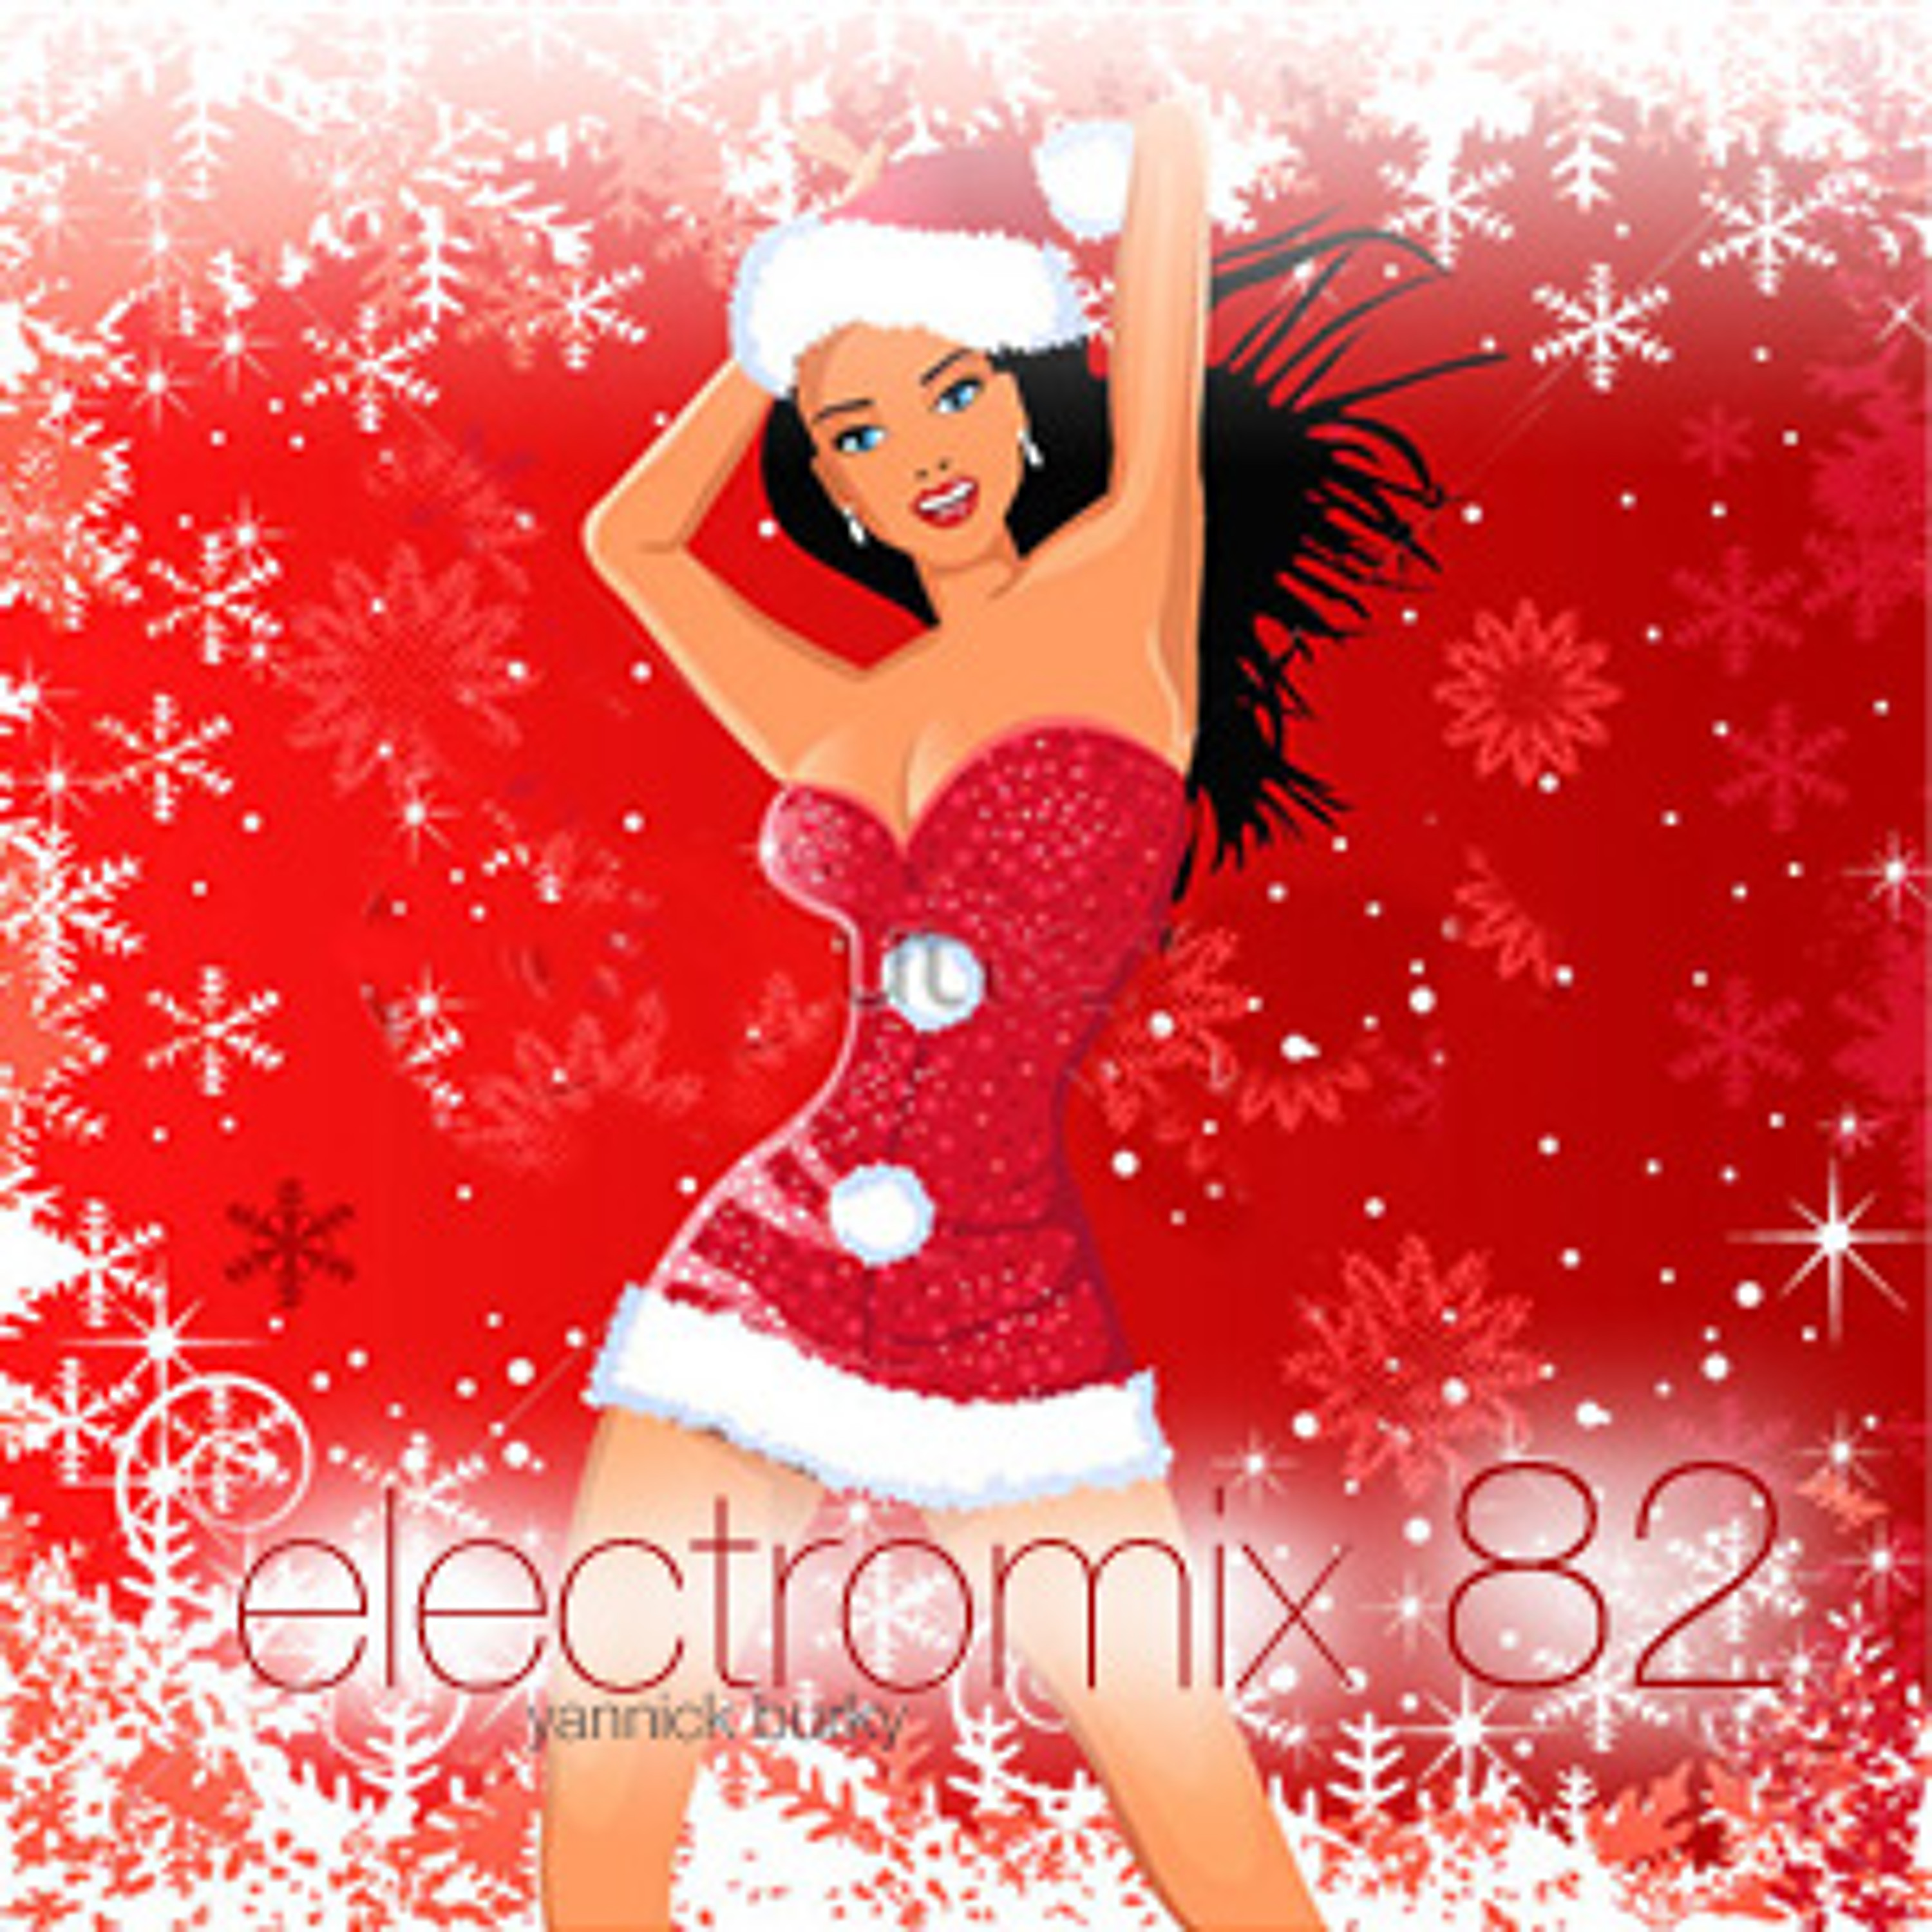 electromix 82 • House Music